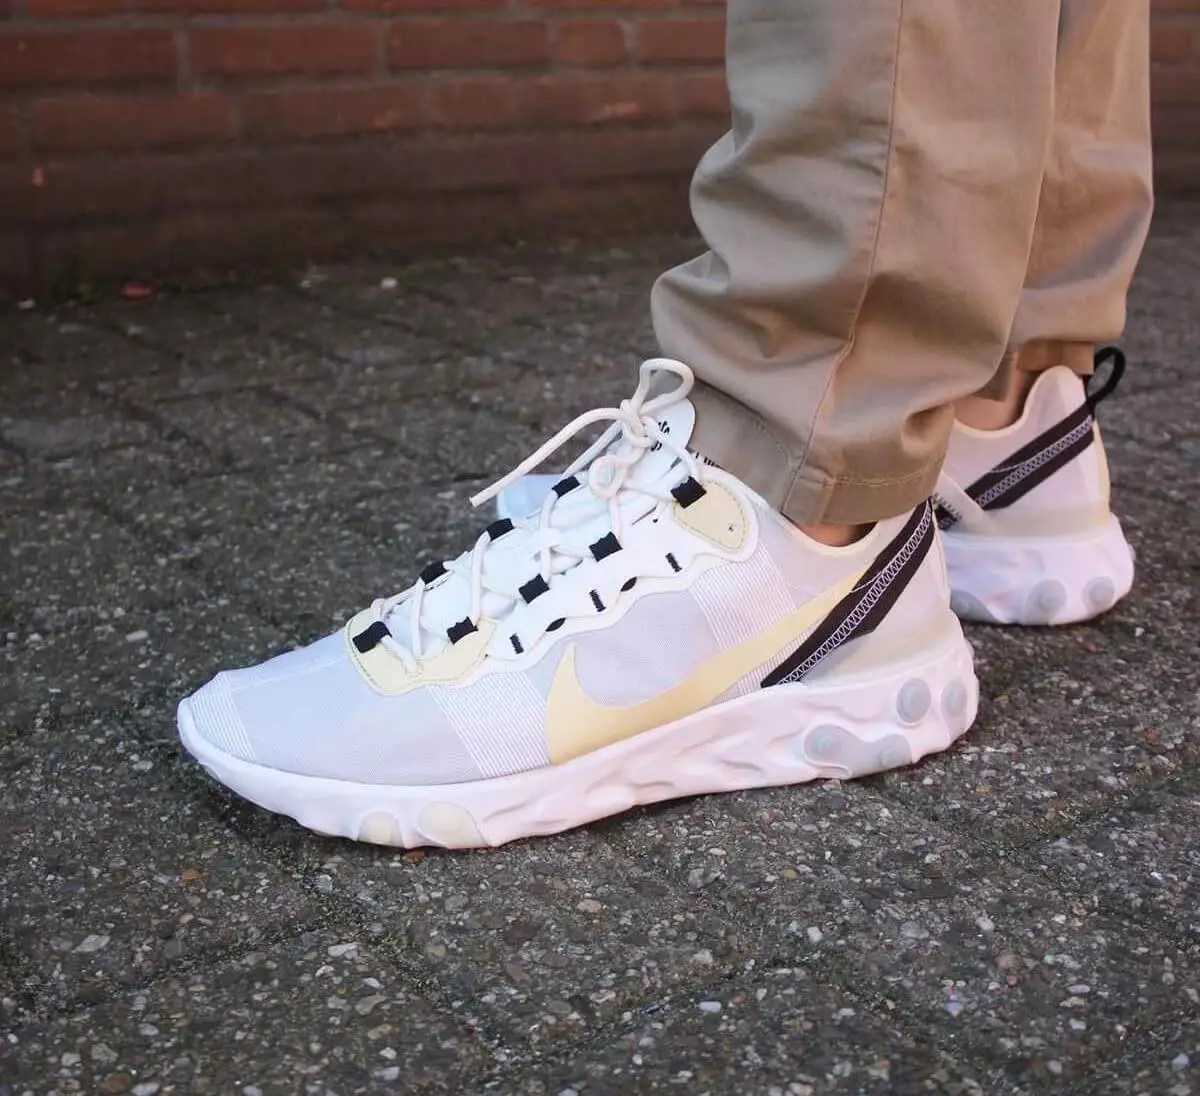 The Nike React Element 55 'Pale Vanilla' Launched Early At Footasylum ...